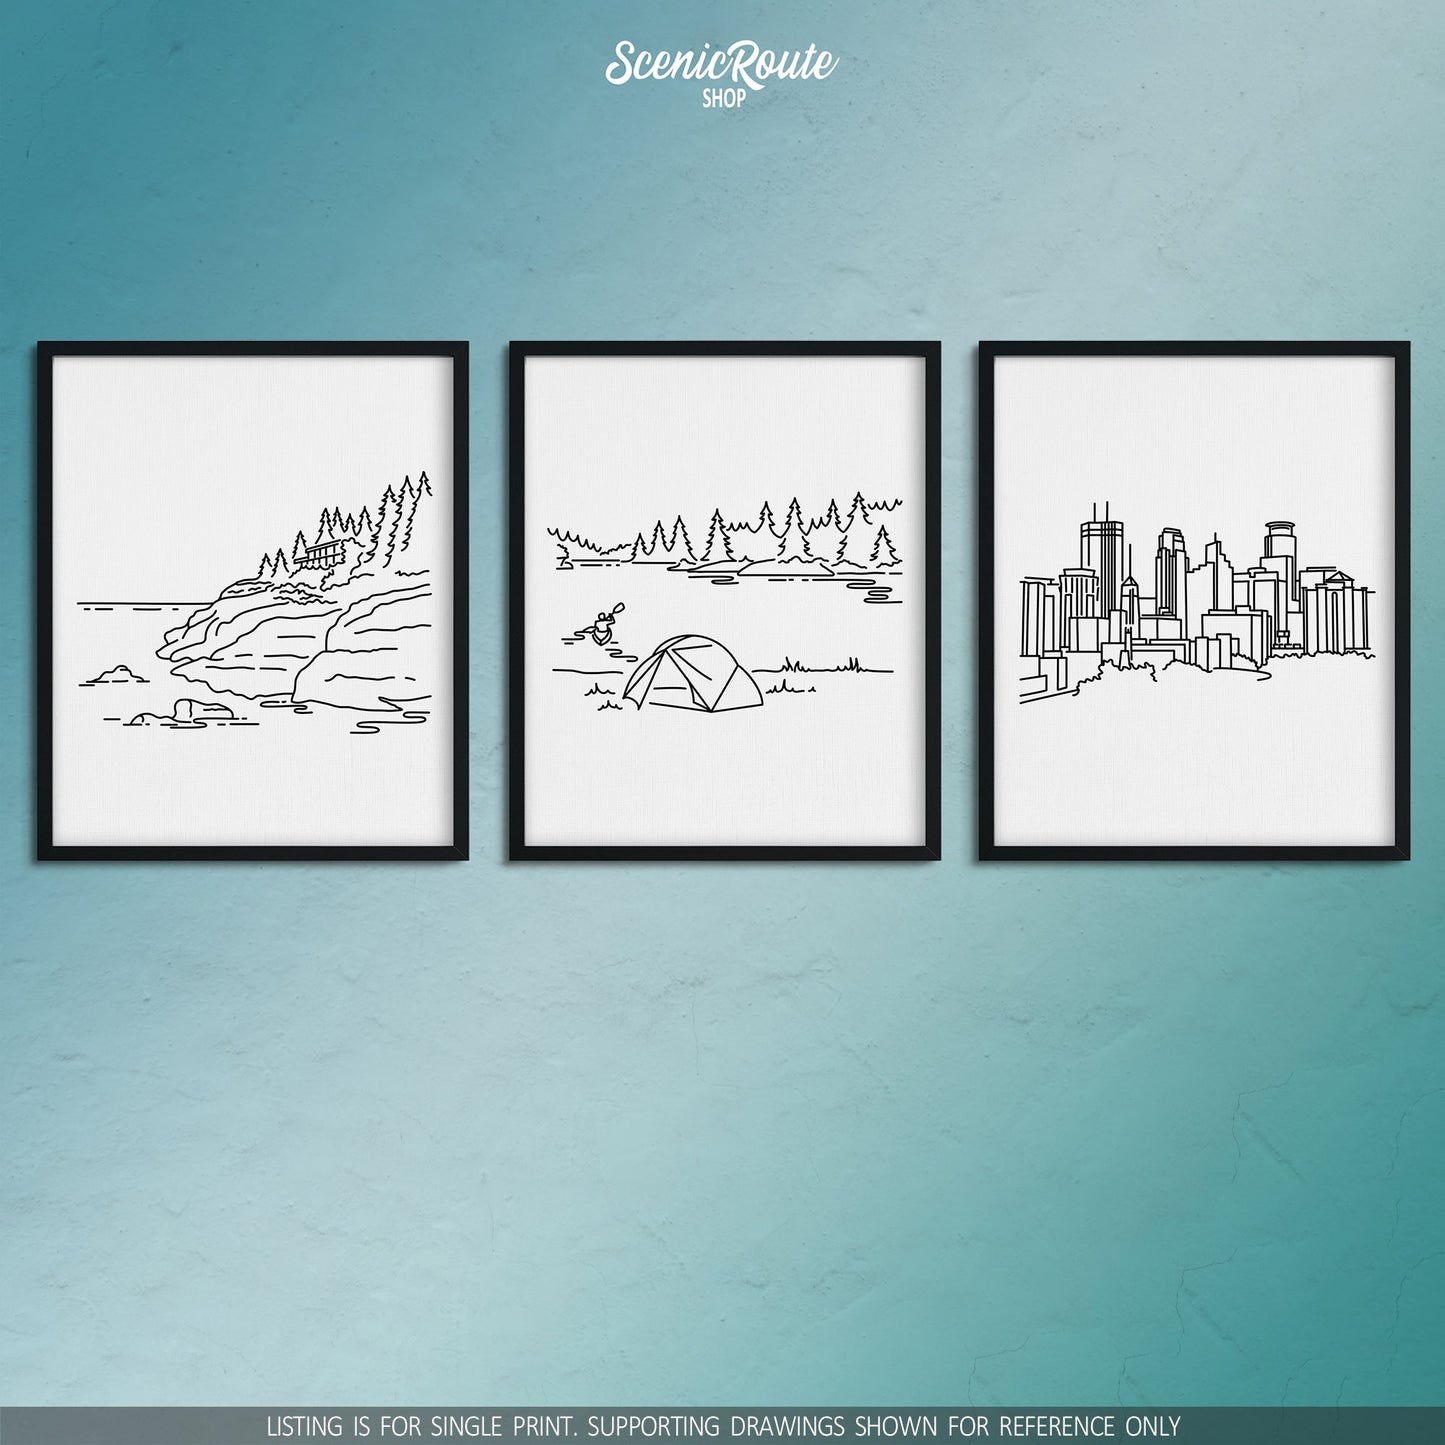 A group of three framed drawings on a blue wall. The line art drawings include Isle Royale National Park, Voyageurs National Park, and the Minneapolis Skyline